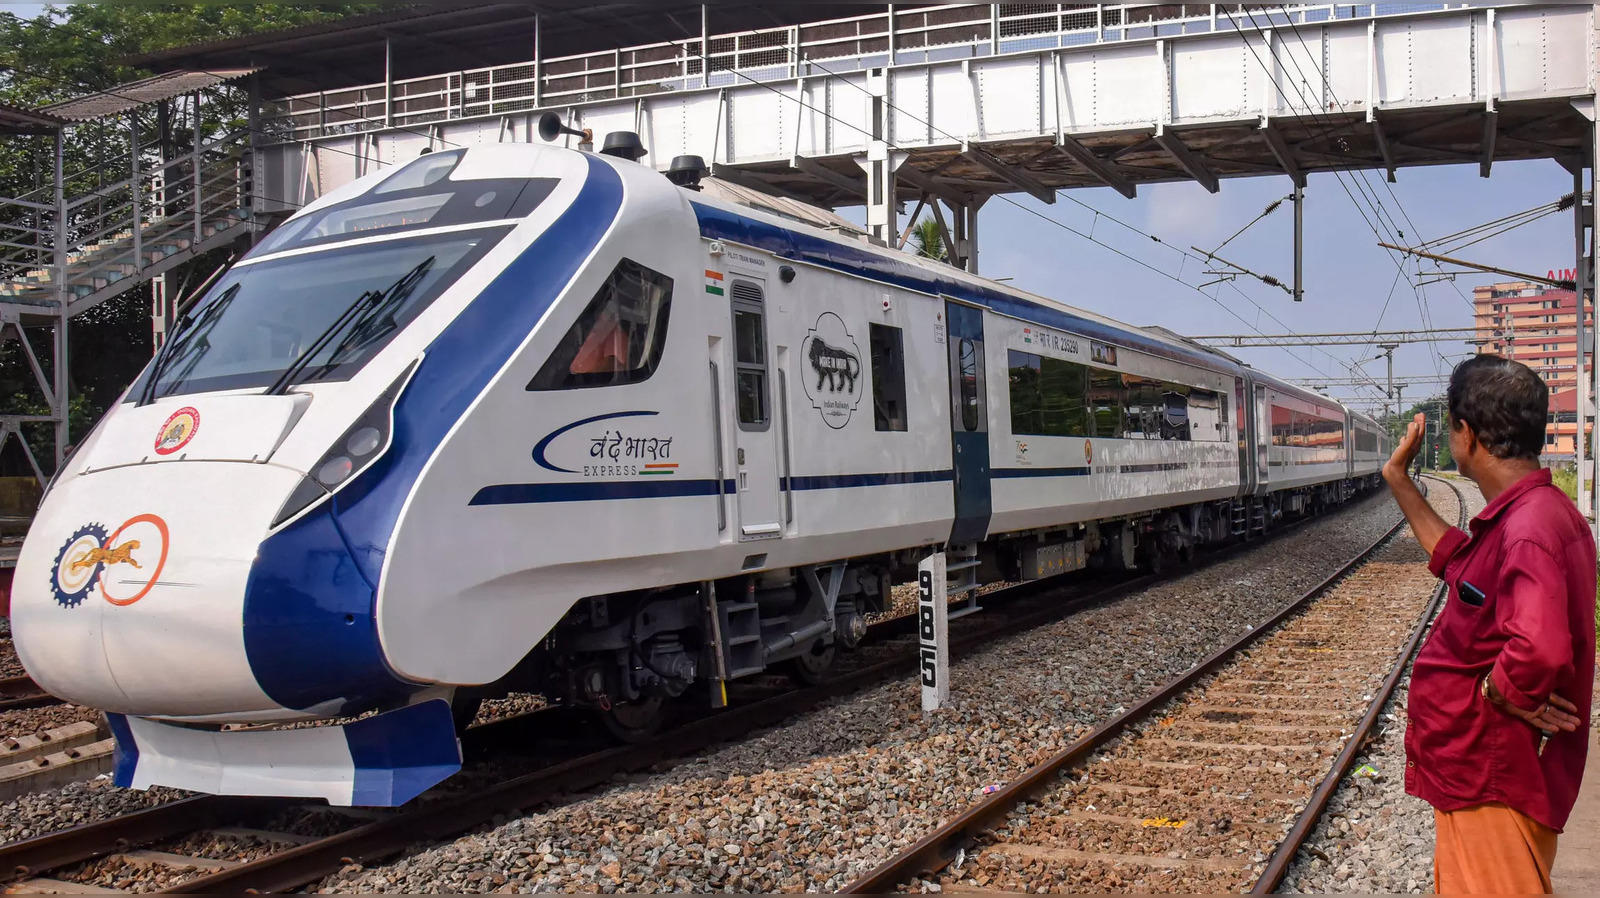 Kerala Vande Bharat Train Timing: Kerala Vande Bharat Express: Fare, route,  timings, and other details - The Economic Times